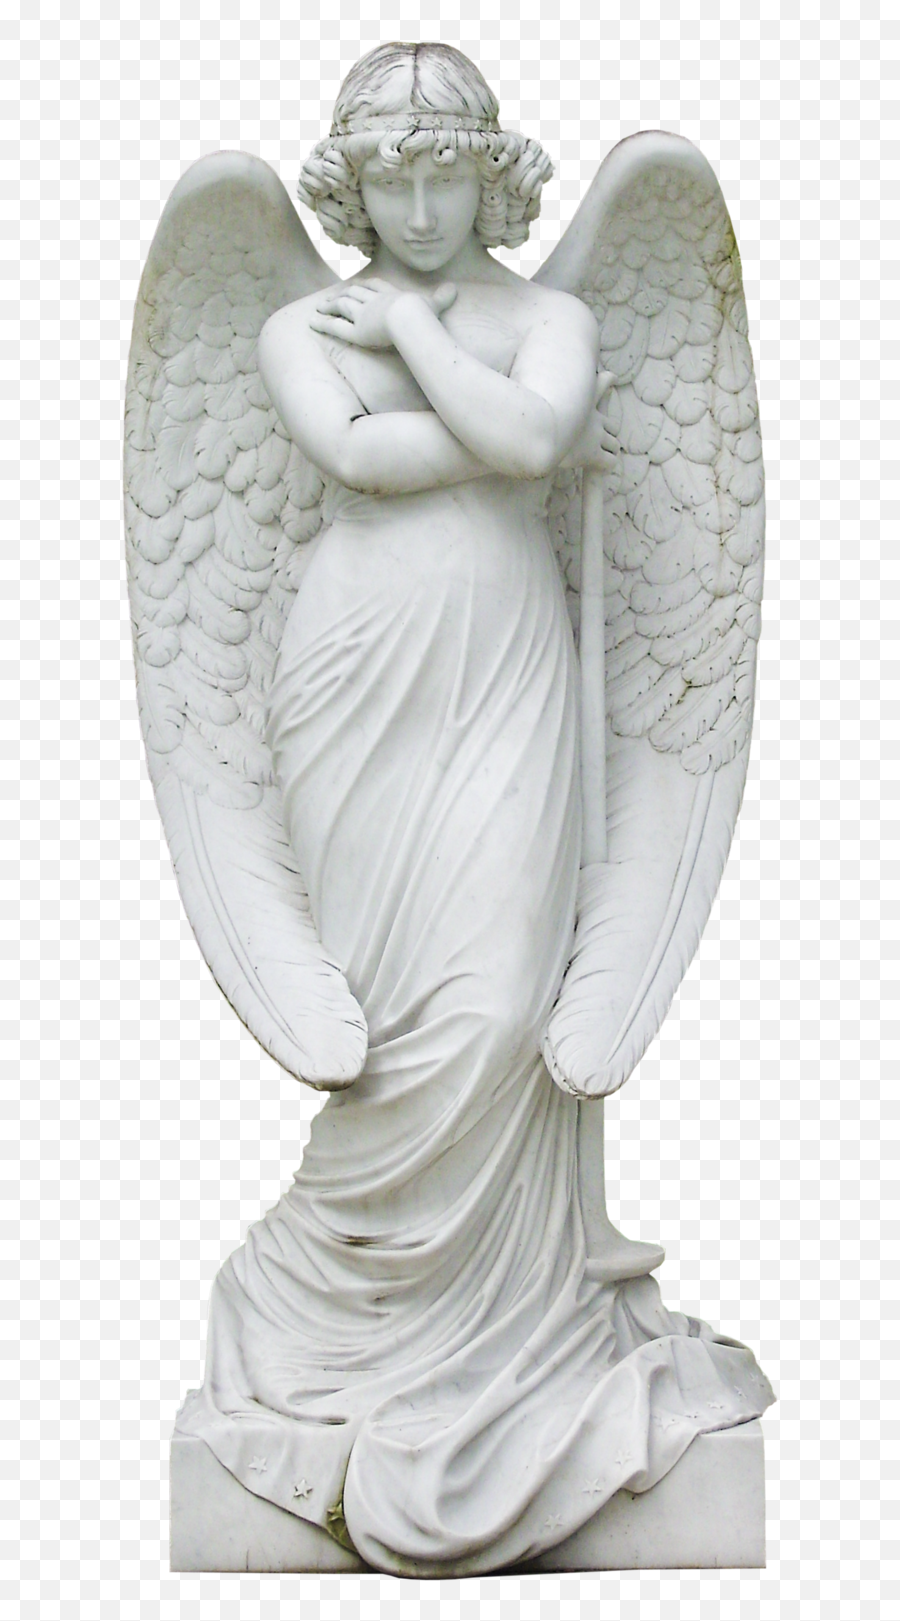 Angel Statue Png - Portable Network Graphics,Angel Statue Png